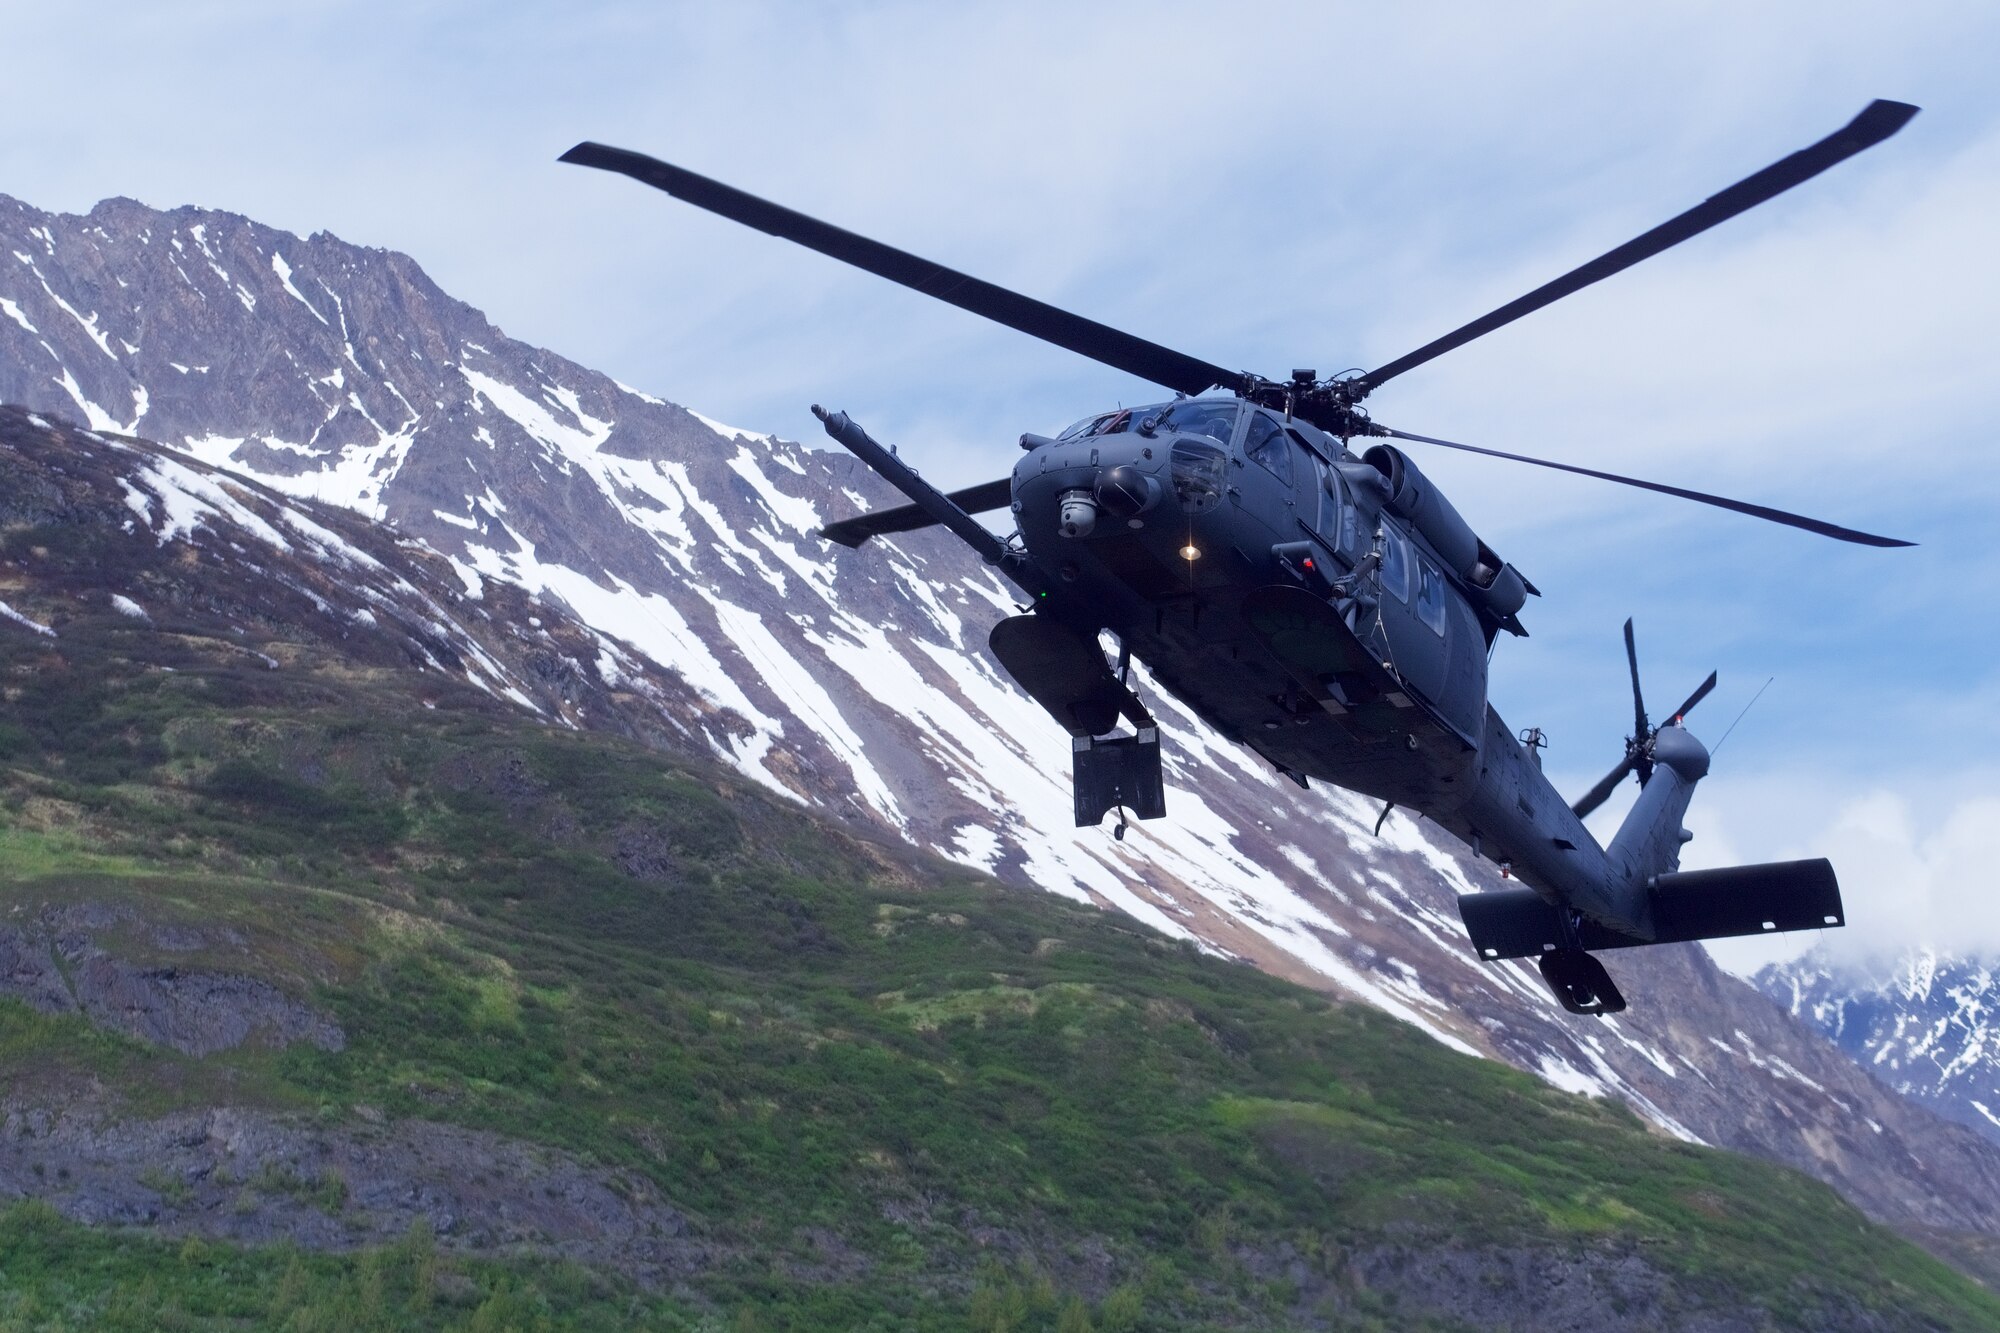 A HH-60G Pave Hawk, assigned to the 210th Rescue Squadron, 176th Wing, Alaska Air National Guard, conducts hoist training June 5, 2018, at Eklutna Glacier, Chugach Mountains, Alaska. The Alaska ANG’s 210th, 211th and 212th Rescue Squadrons specialize in combat search and rescue, recovering downed, injured or isolated personnel from harm’s way. (U.S. Air National Guard photo by David Bedard)